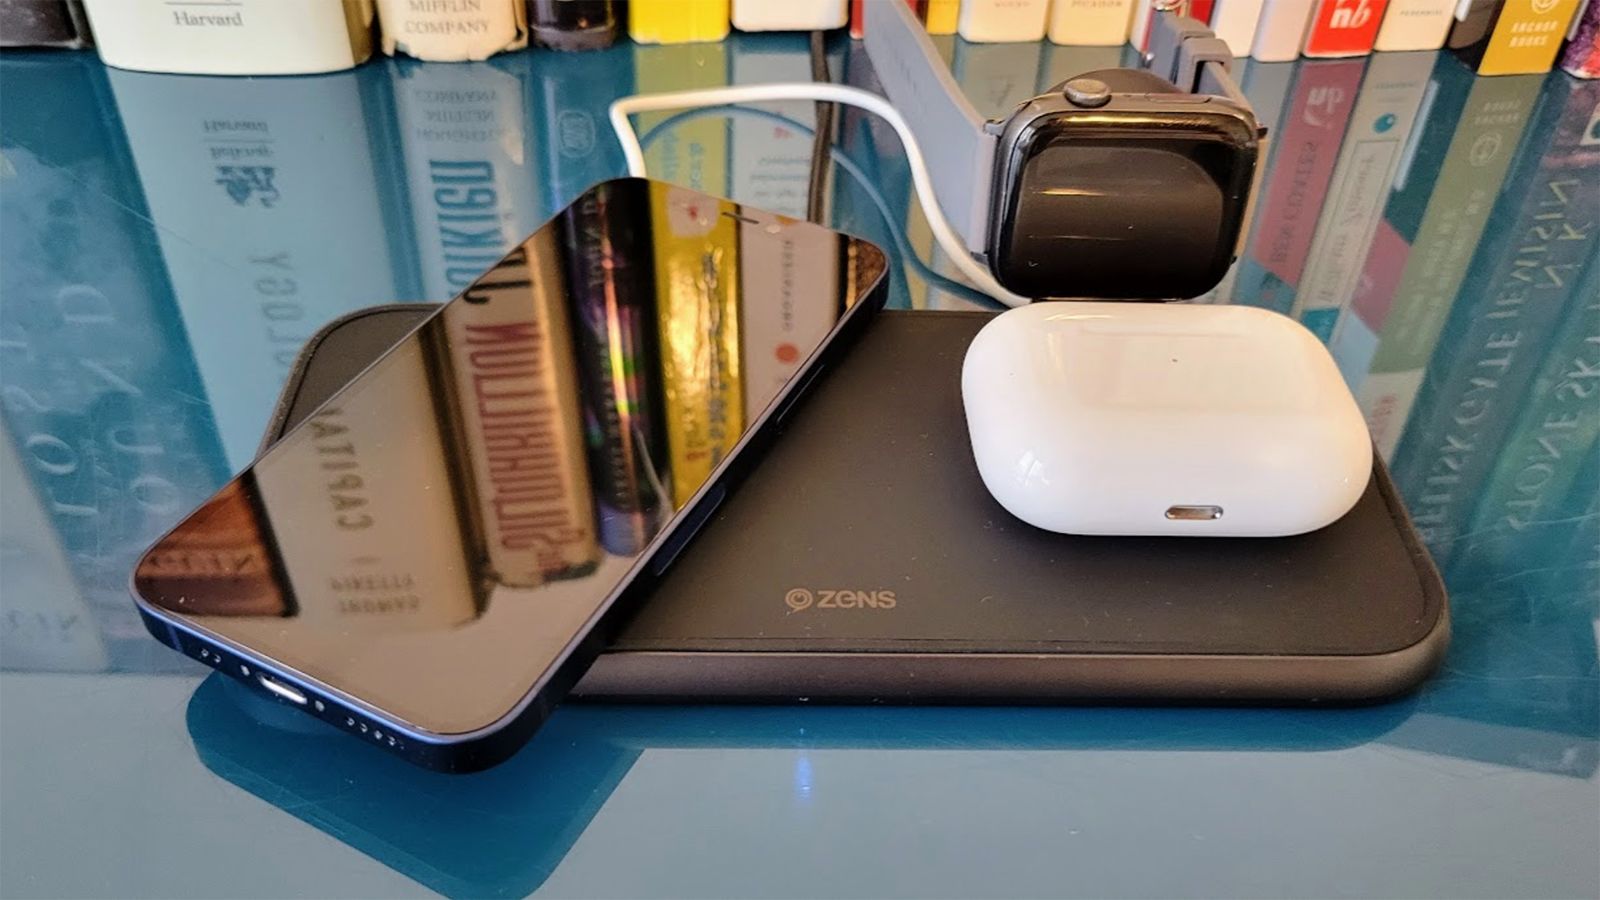 How to choose a wireless charger for your iPhone - CNET